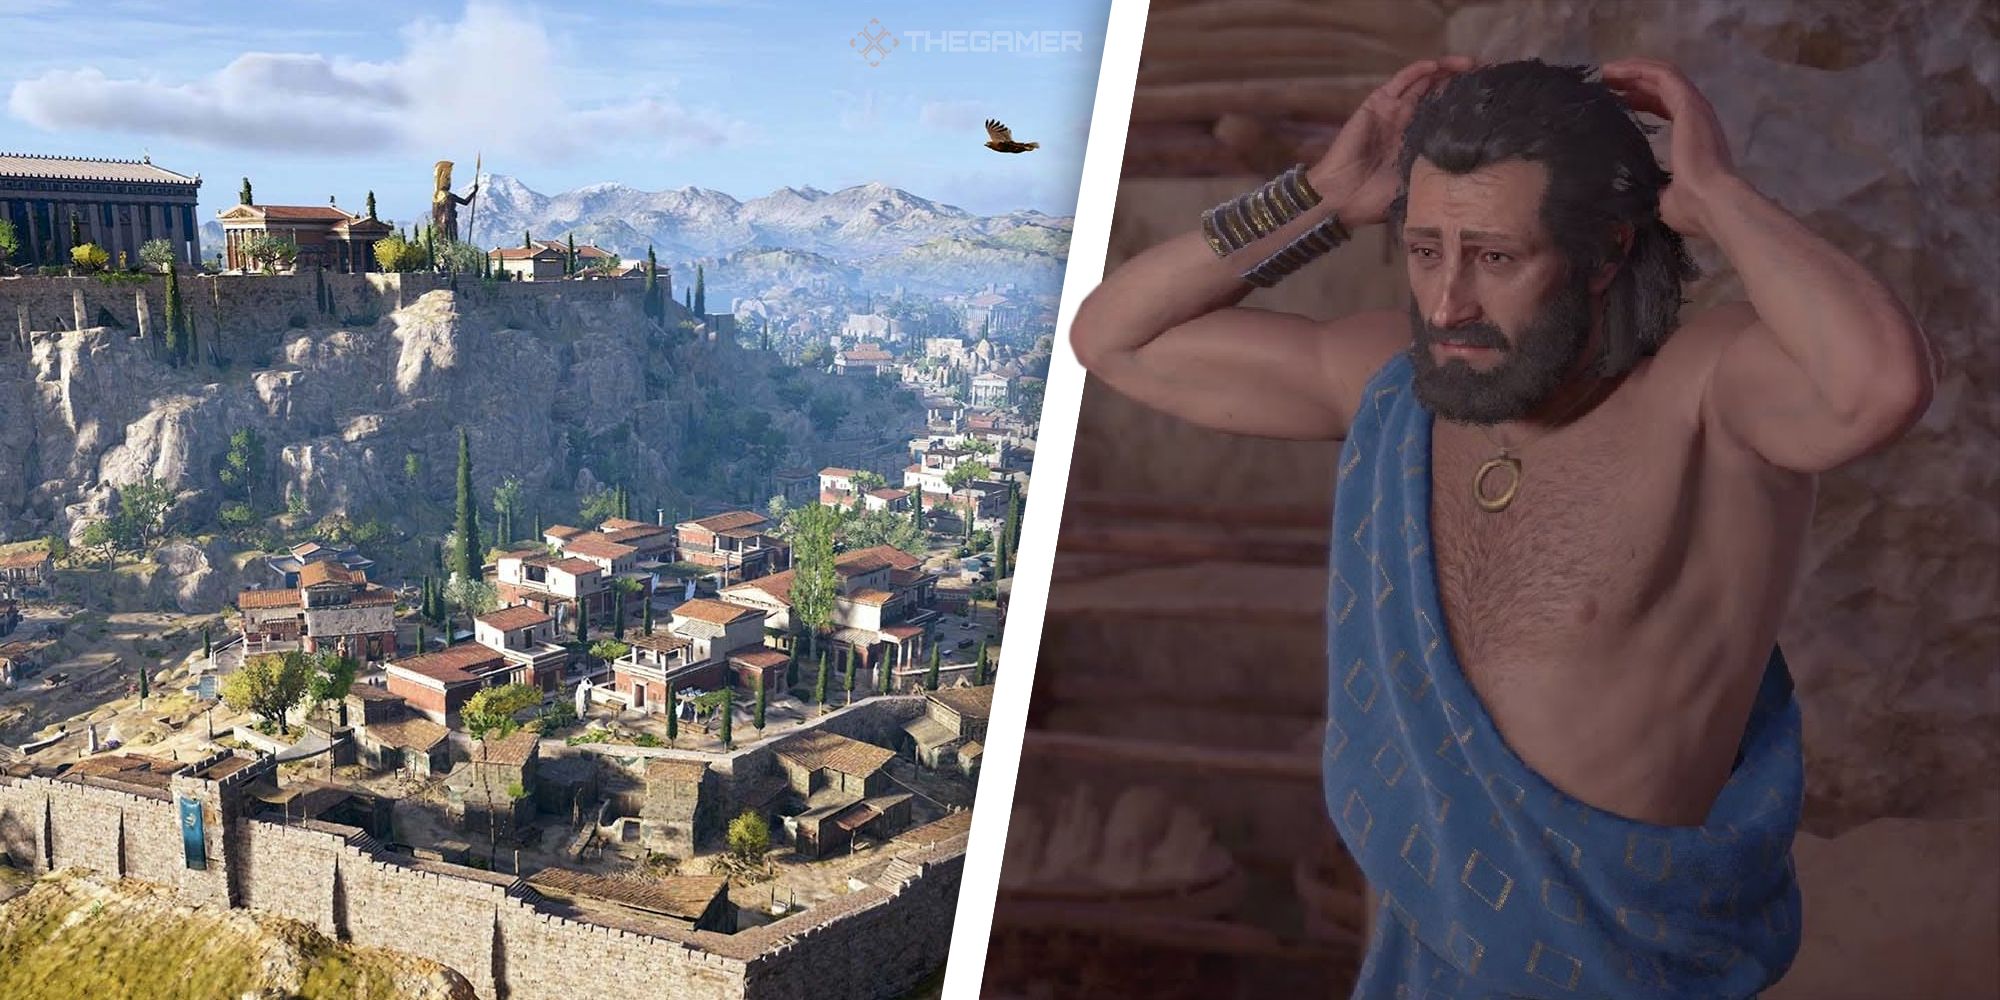 A collage showing Phidias on the right, grabbing his head, and a city on the left.